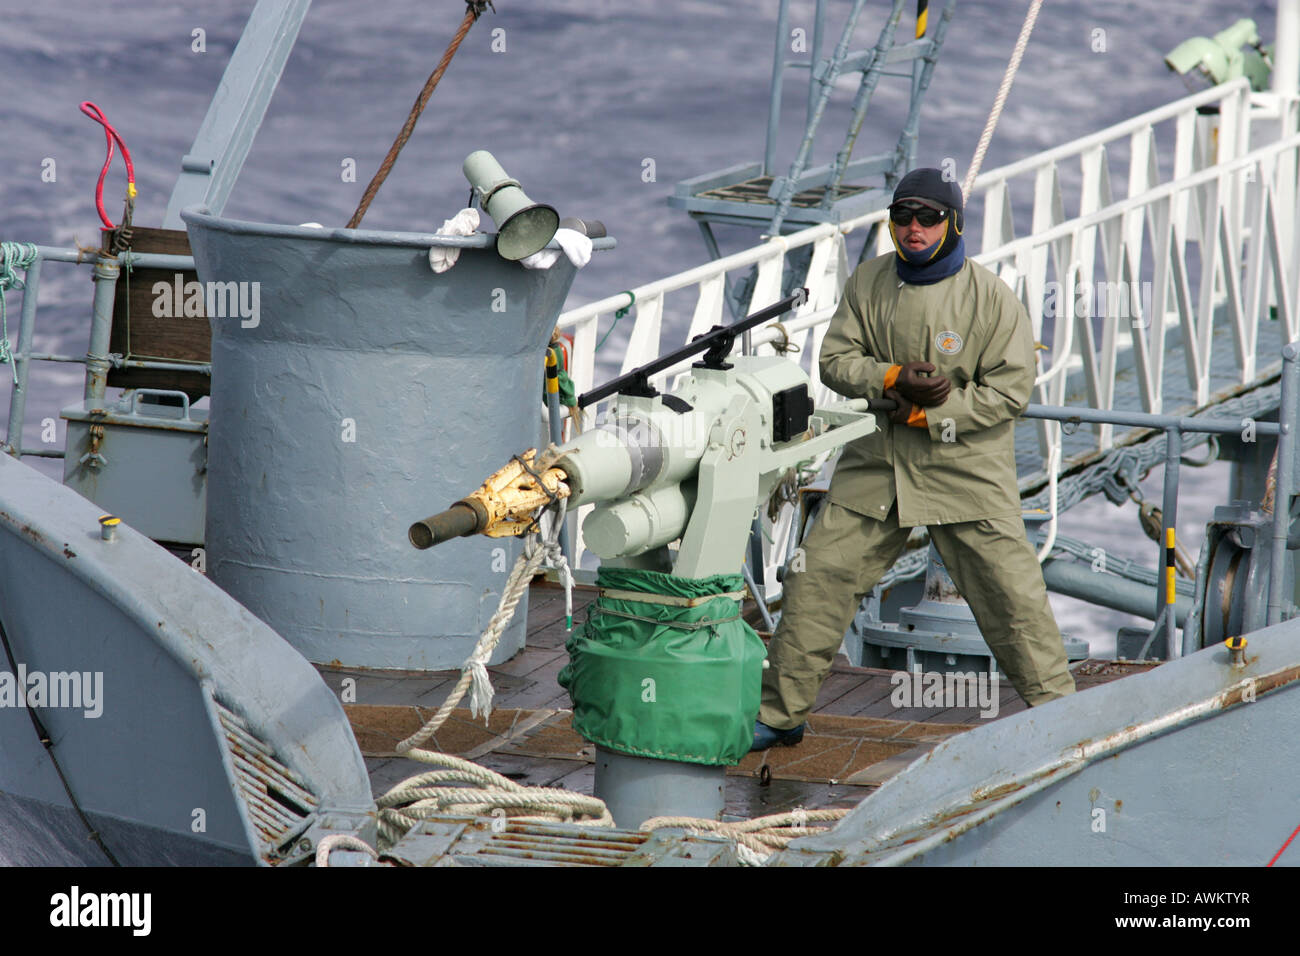 Harpoonist with harpoon aboard Japanese whaling ship, Southern Ocean. Stock Photo